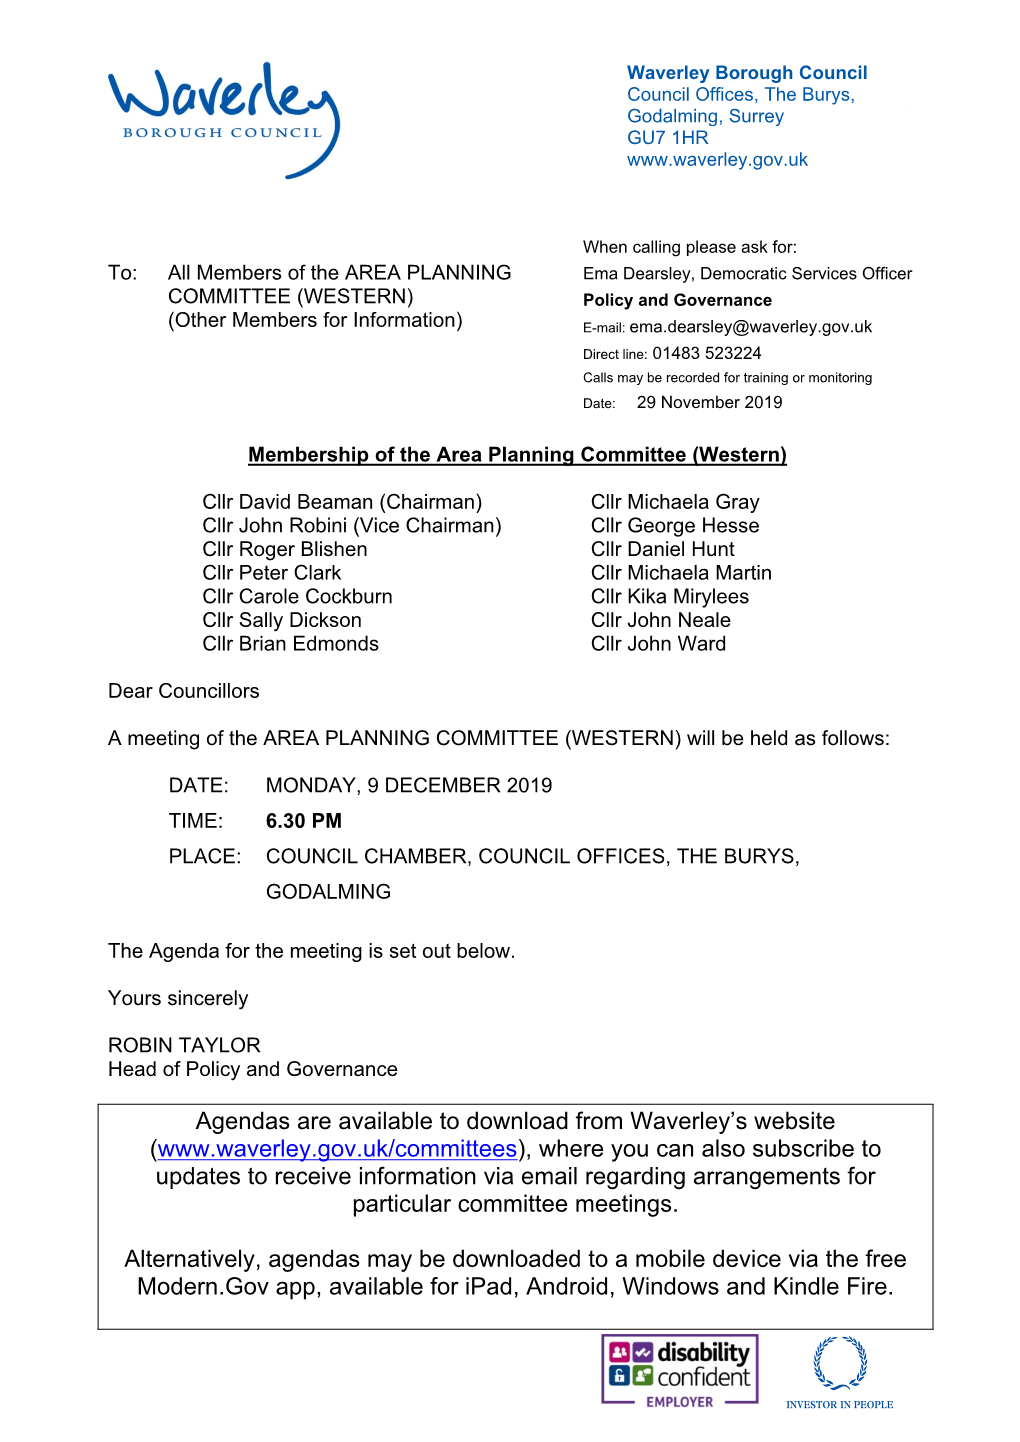 (Public Pack)Agenda Document for Area Planning Committee (Western